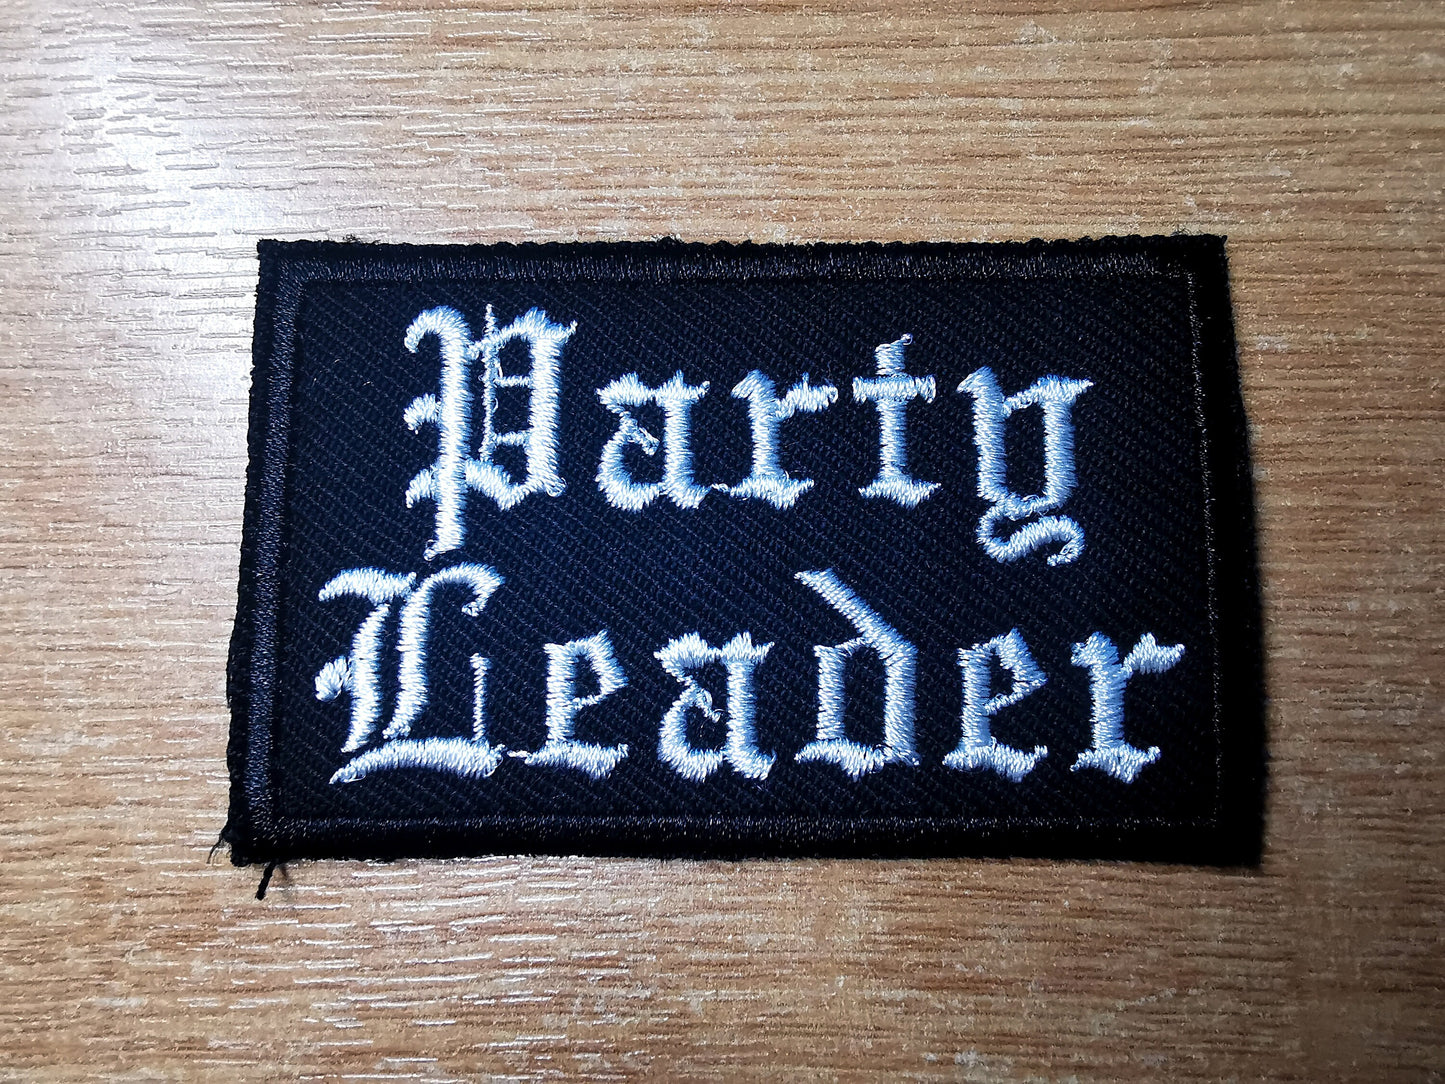 Party Leader RPG Patch Tabletop Dungeon Synth and Fantasy Role-Play Embroidered Iron On